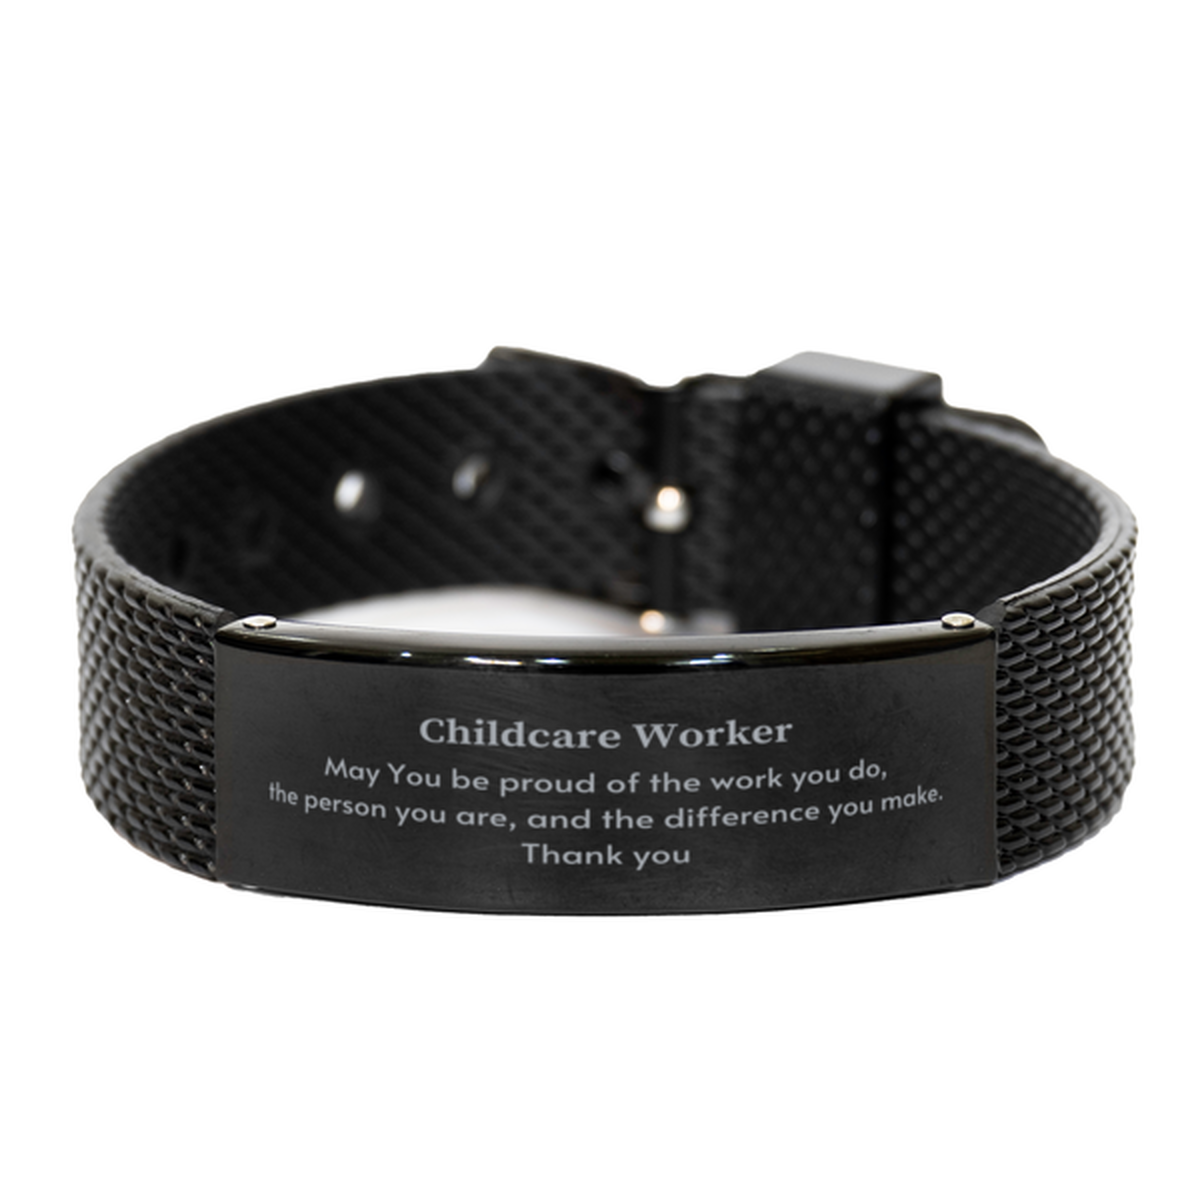 Heartwarming Black Shark Mesh Bracelet Retirement Coworkers Gifts for Childcare Worker, Childcare Worker May You be proud of the work you do, the person you are Gifts for Boss Men Women Friends